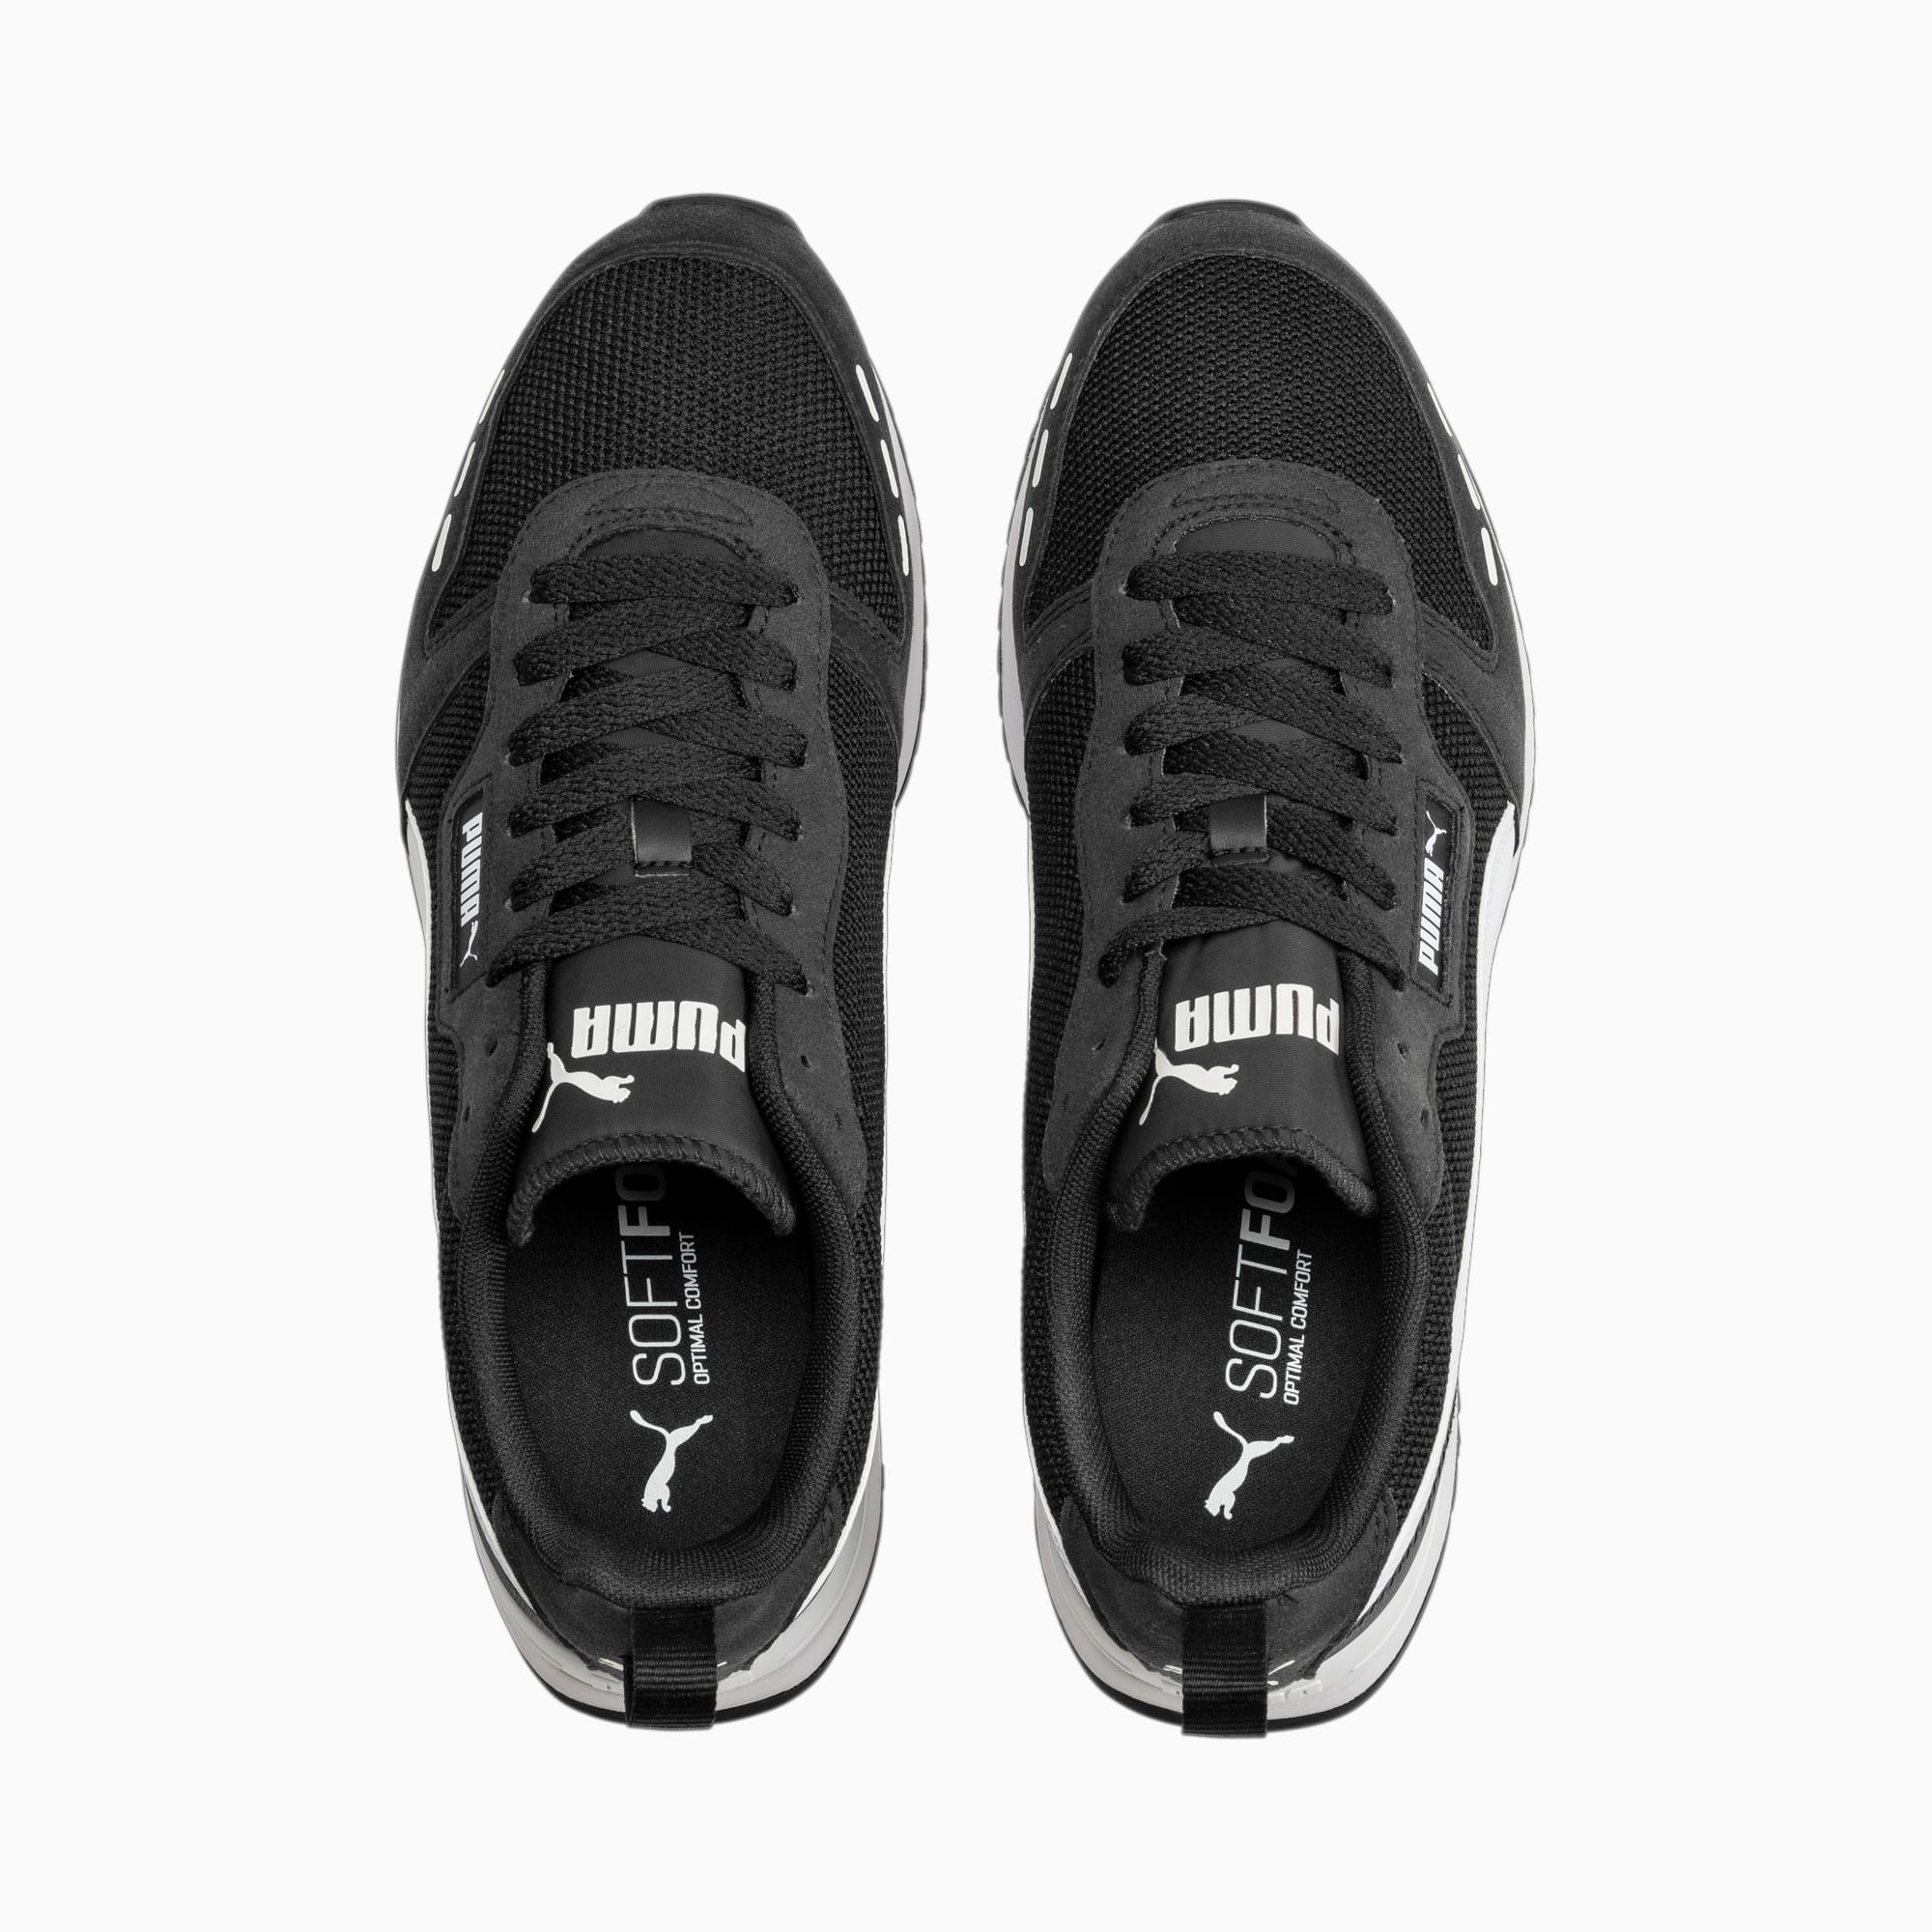 Women's PUMA R78 Runner Trainers, Black/White, Size 36, Shoes